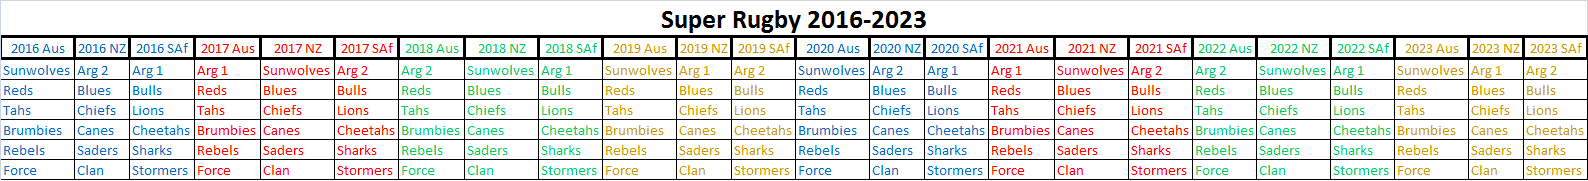 Super Rugby 2016-23 image.gif